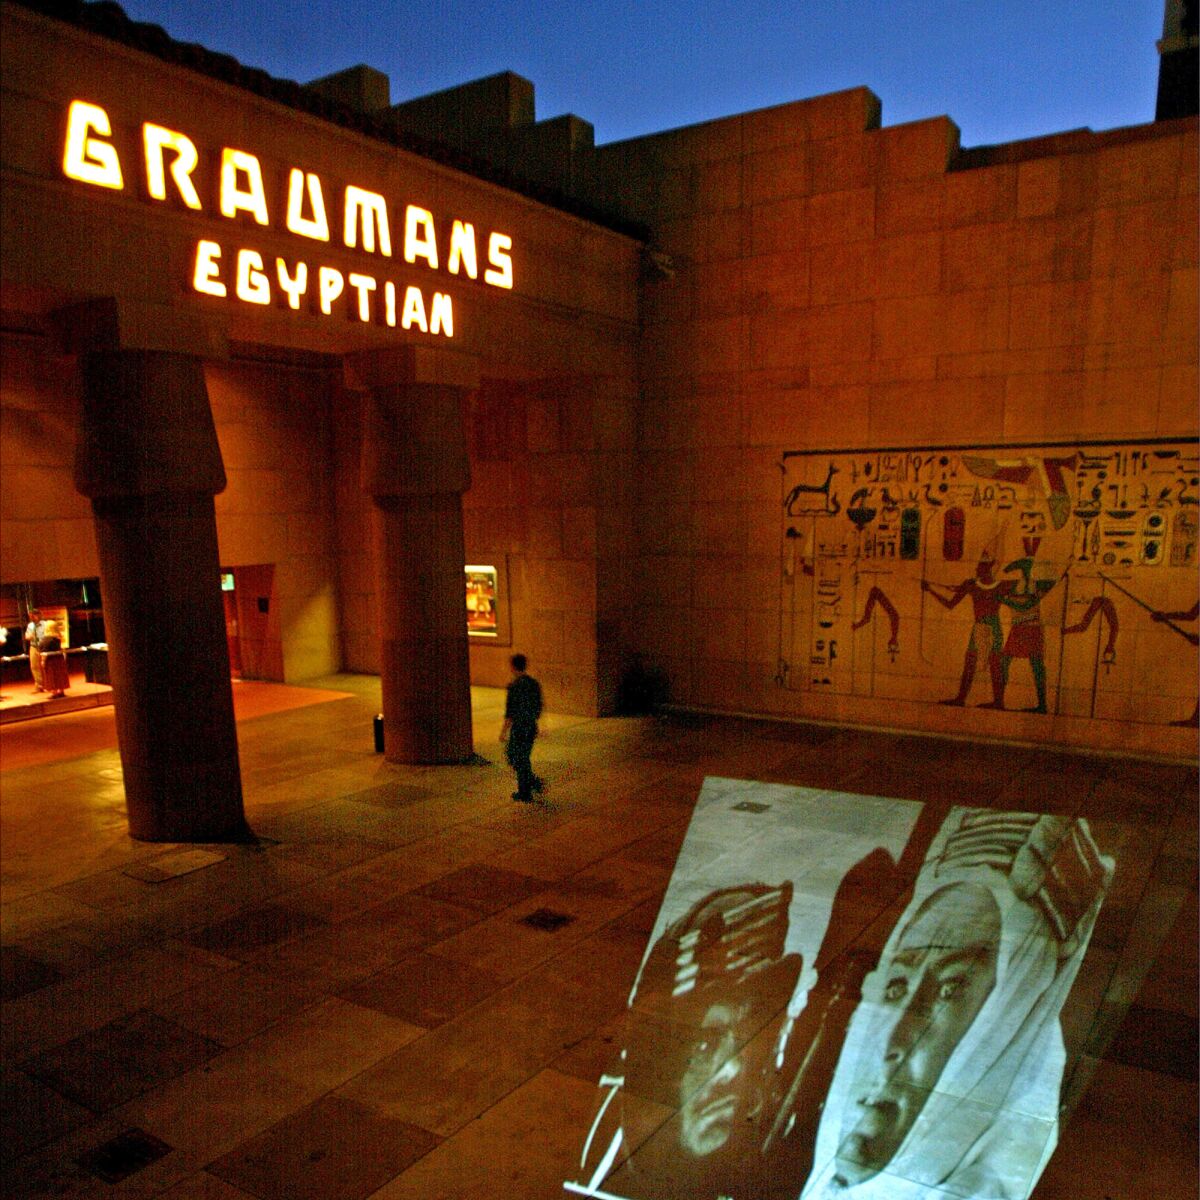 Sid Grauman opened the Egyptian Theatre in 1922 at a time when an Egyptian craze was sweeping the nation following the discovery of King Tutankhamen's tomb.